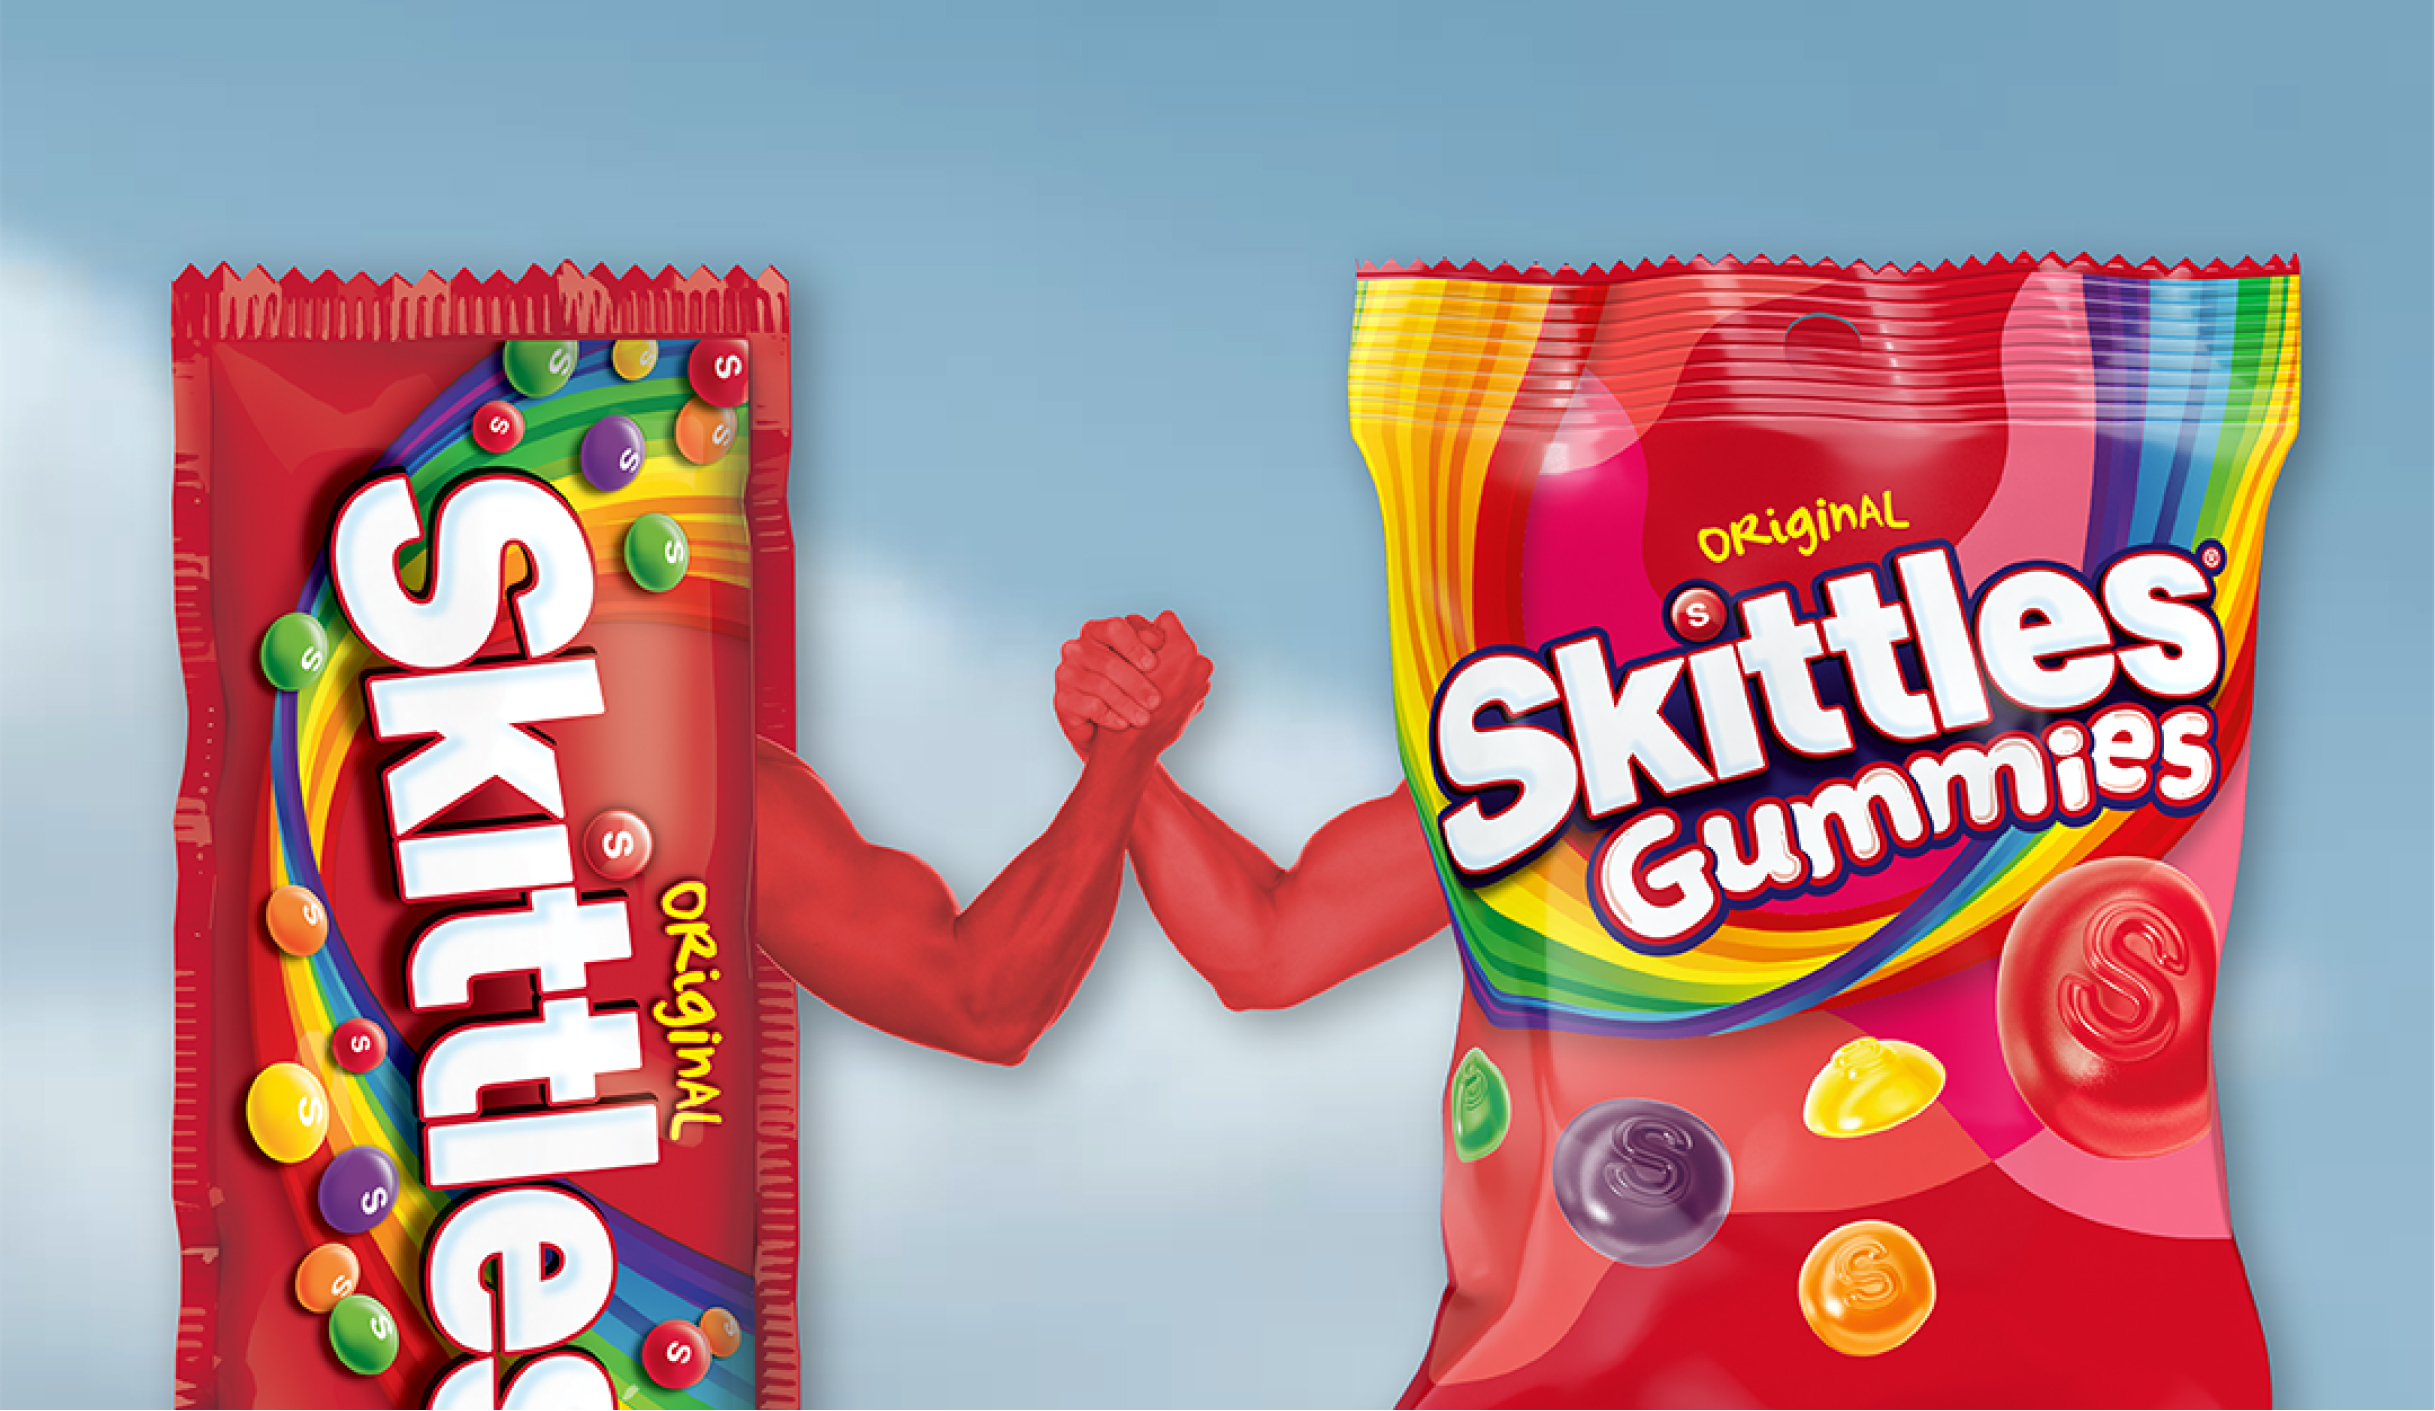 Skittles original chewy bag and skittles original gummies bag in an arm wrestling contest